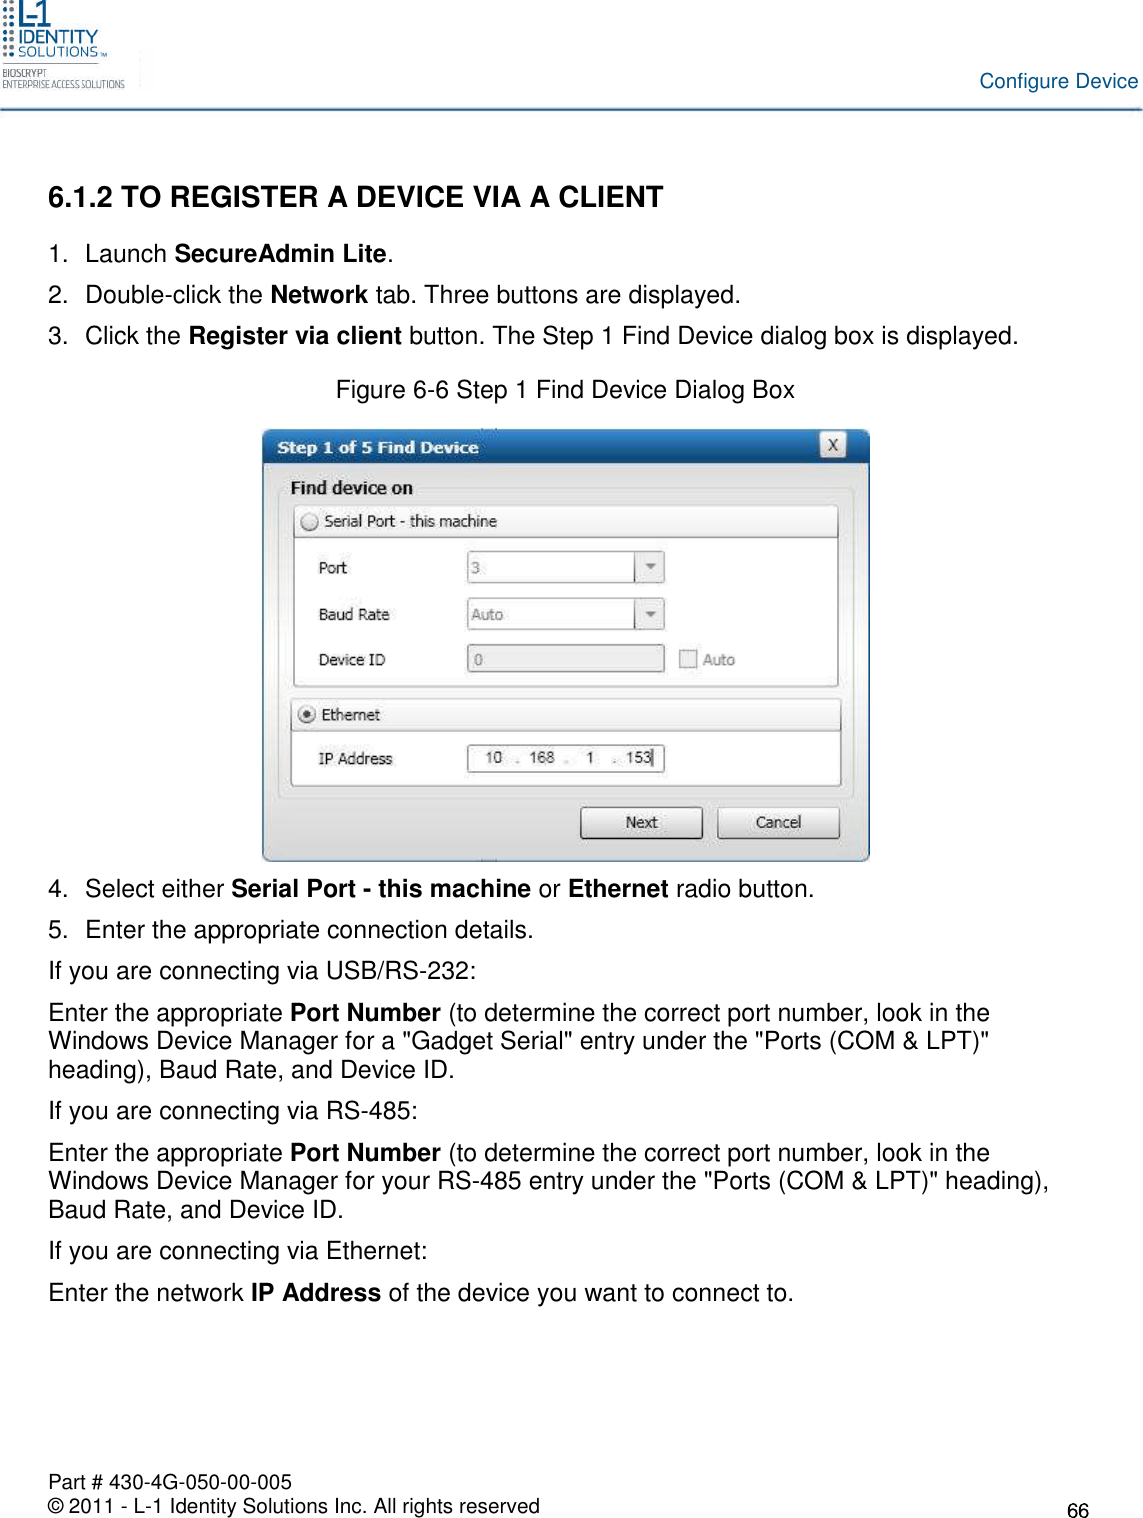 Part # 430-4G-050-00-005© 2011 - L-1 Identity Solutions Inc. All rights reservedConfigure Device6.1.2 TO REGISTER A DEVICE VIA A CLIENT1. Launch SecureAdmin Lite.2. Double-click the Network tab. Three buttons are displayed.3. Click the Register via client button. The Step 1 Find Device dialog box is displayed.Figure 6-6 Step 1 Find Device Dialog Box4. Select either Serial Port - this machine or Ethernet radio button.5. Enter the appropriate connection details.If you are connecting via USB/RS-232:Enter the appropriate Port Number (to determine the correct port number, look in theWindows Device Manager for a &quot;Gadget Serial&quot; entry under the &quot;Ports (COM &amp; LPT)&quot;heading), Baud Rate, and Device ID.If you are connecting via RS-485:Enter the appropriate Port Number (to determine the correct port number, look in theWindows Device Manager for your RS-485 entry under the &quot;Ports (COM &amp; LPT)&quot; heading),Baud Rate, and Device ID.If you are connecting via Ethernet:Enter the network IP Address of the device you want to connect to.